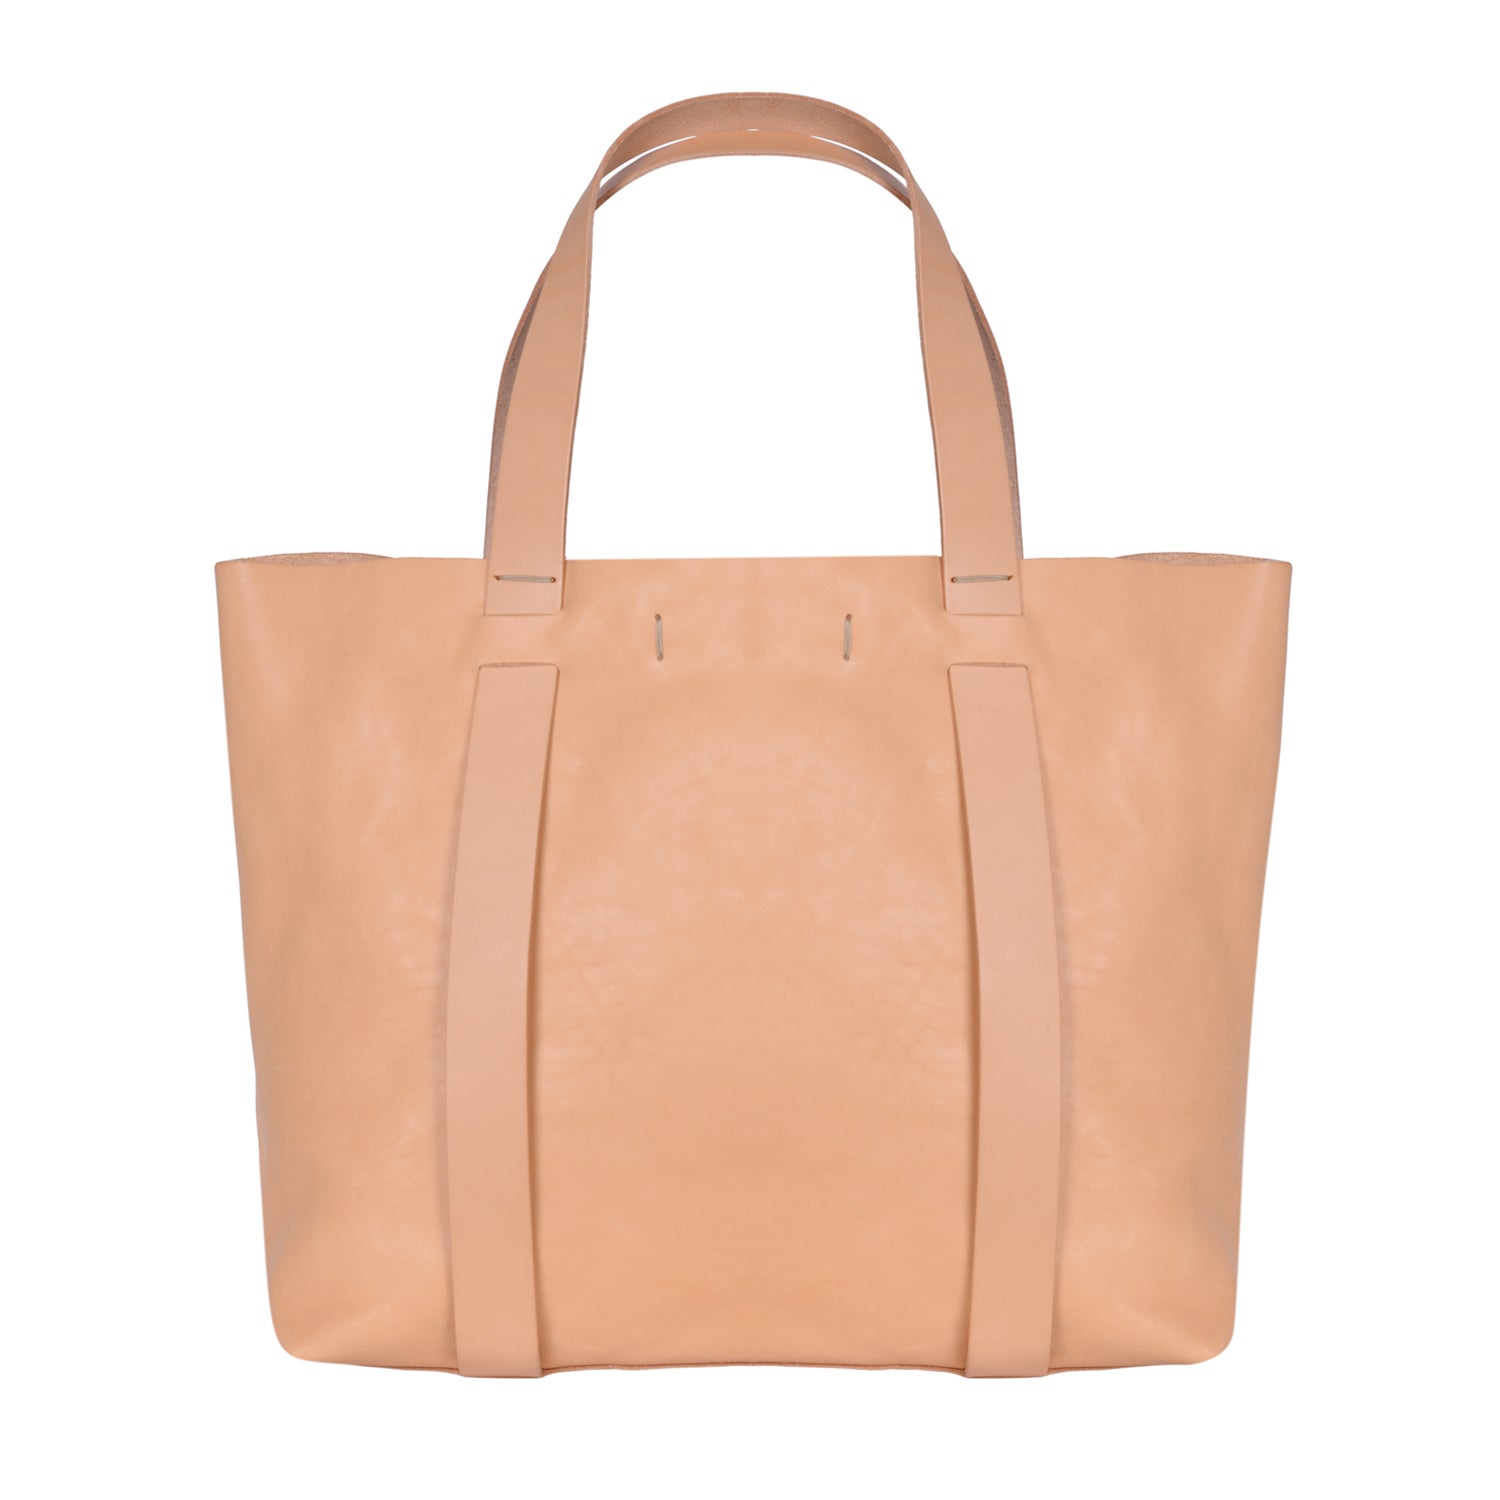 IL BISONTE  WOMEN'S TOTE HANDBAG IN NATURAL COWHIDE LEATHER